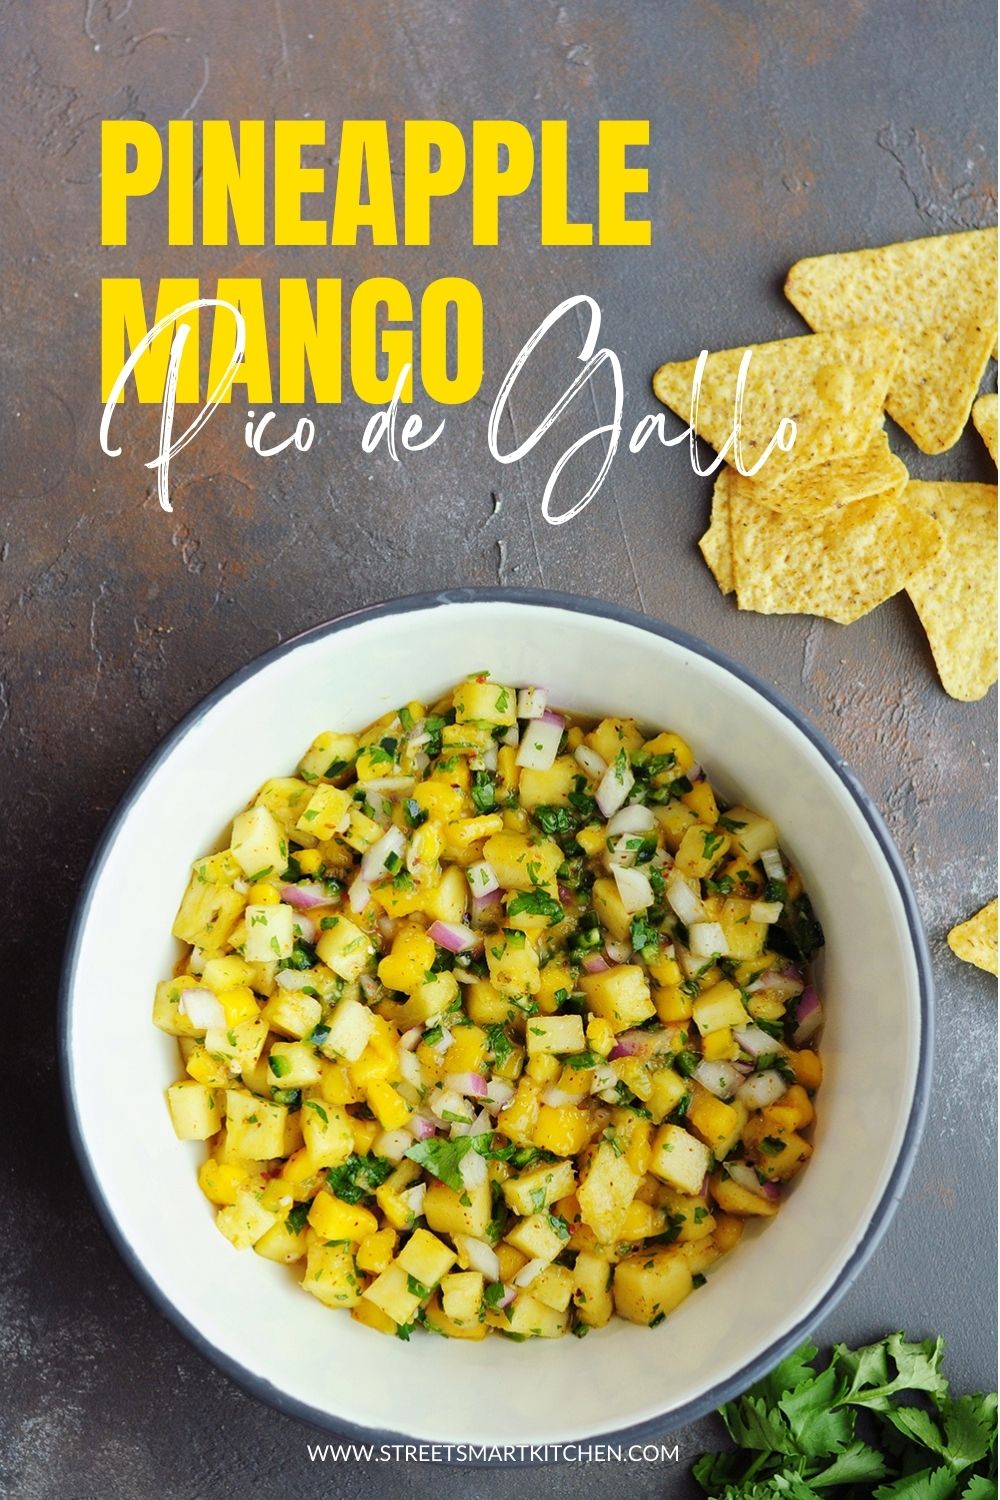 This pineapple mango pico de gallo is so fresh and flavor-packed. Ready in just 10 minutes. Perfect on tacos, with entrees, or with chips.